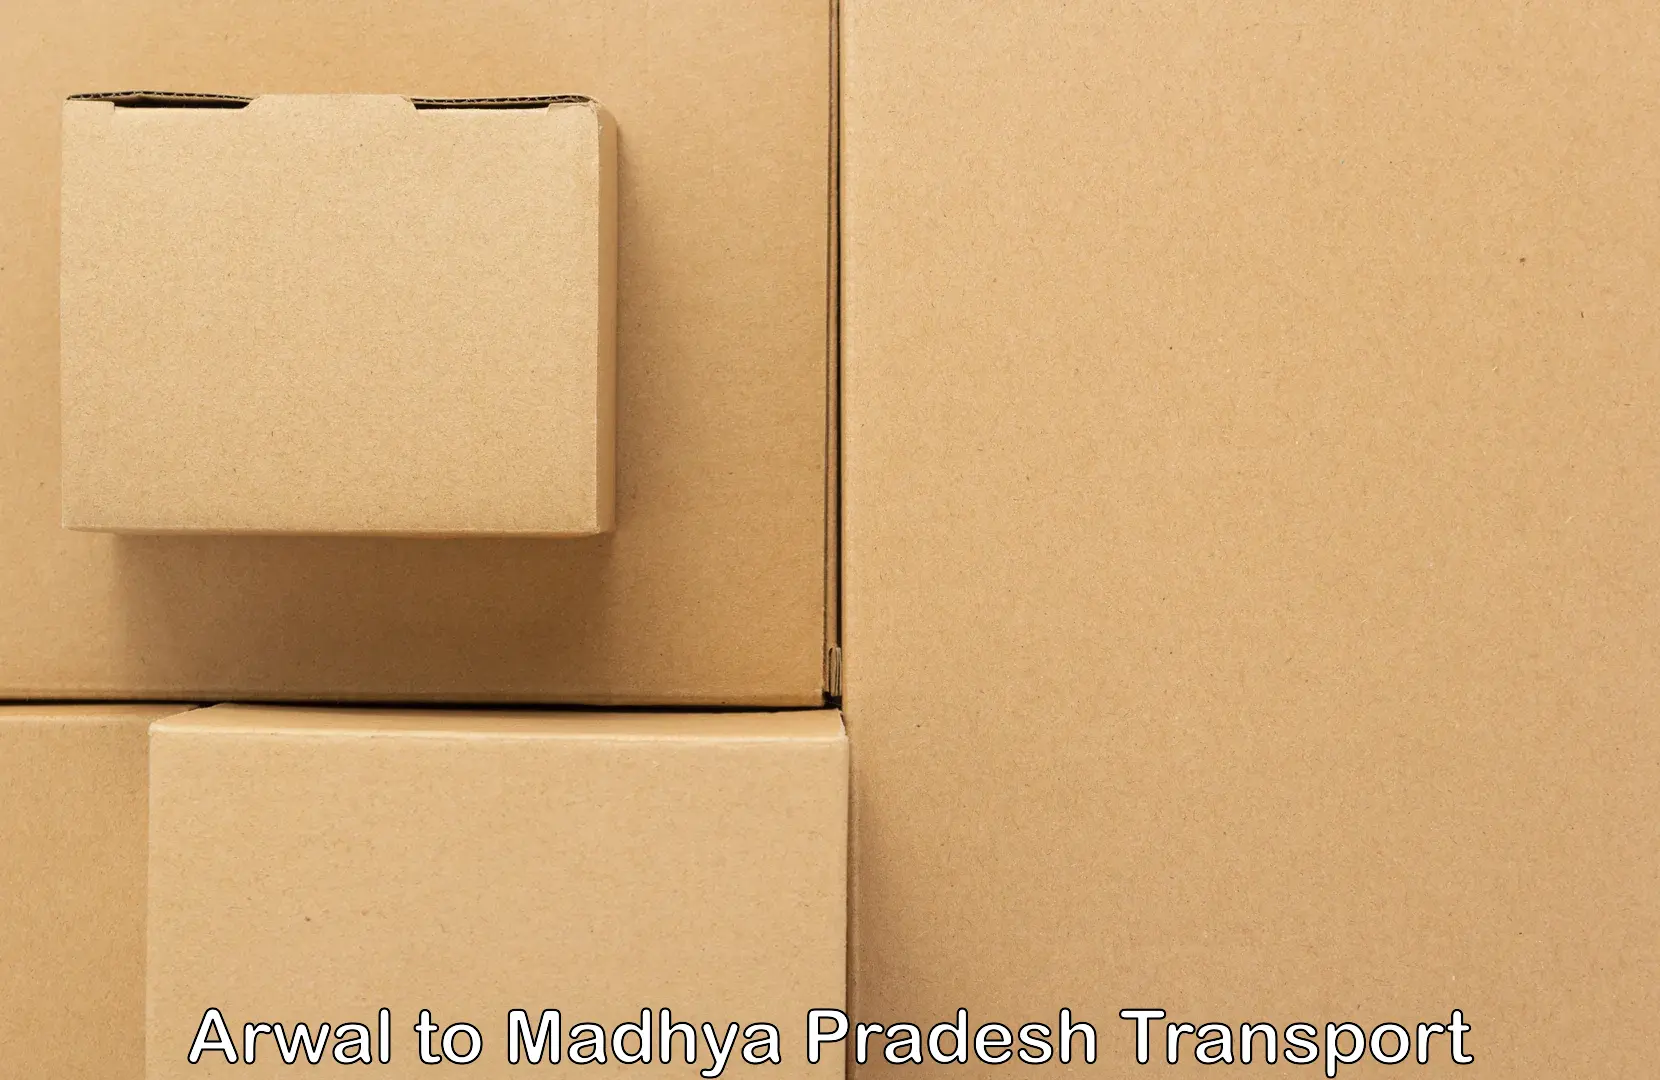 Truck transport companies in India Arwal to Maheshwar